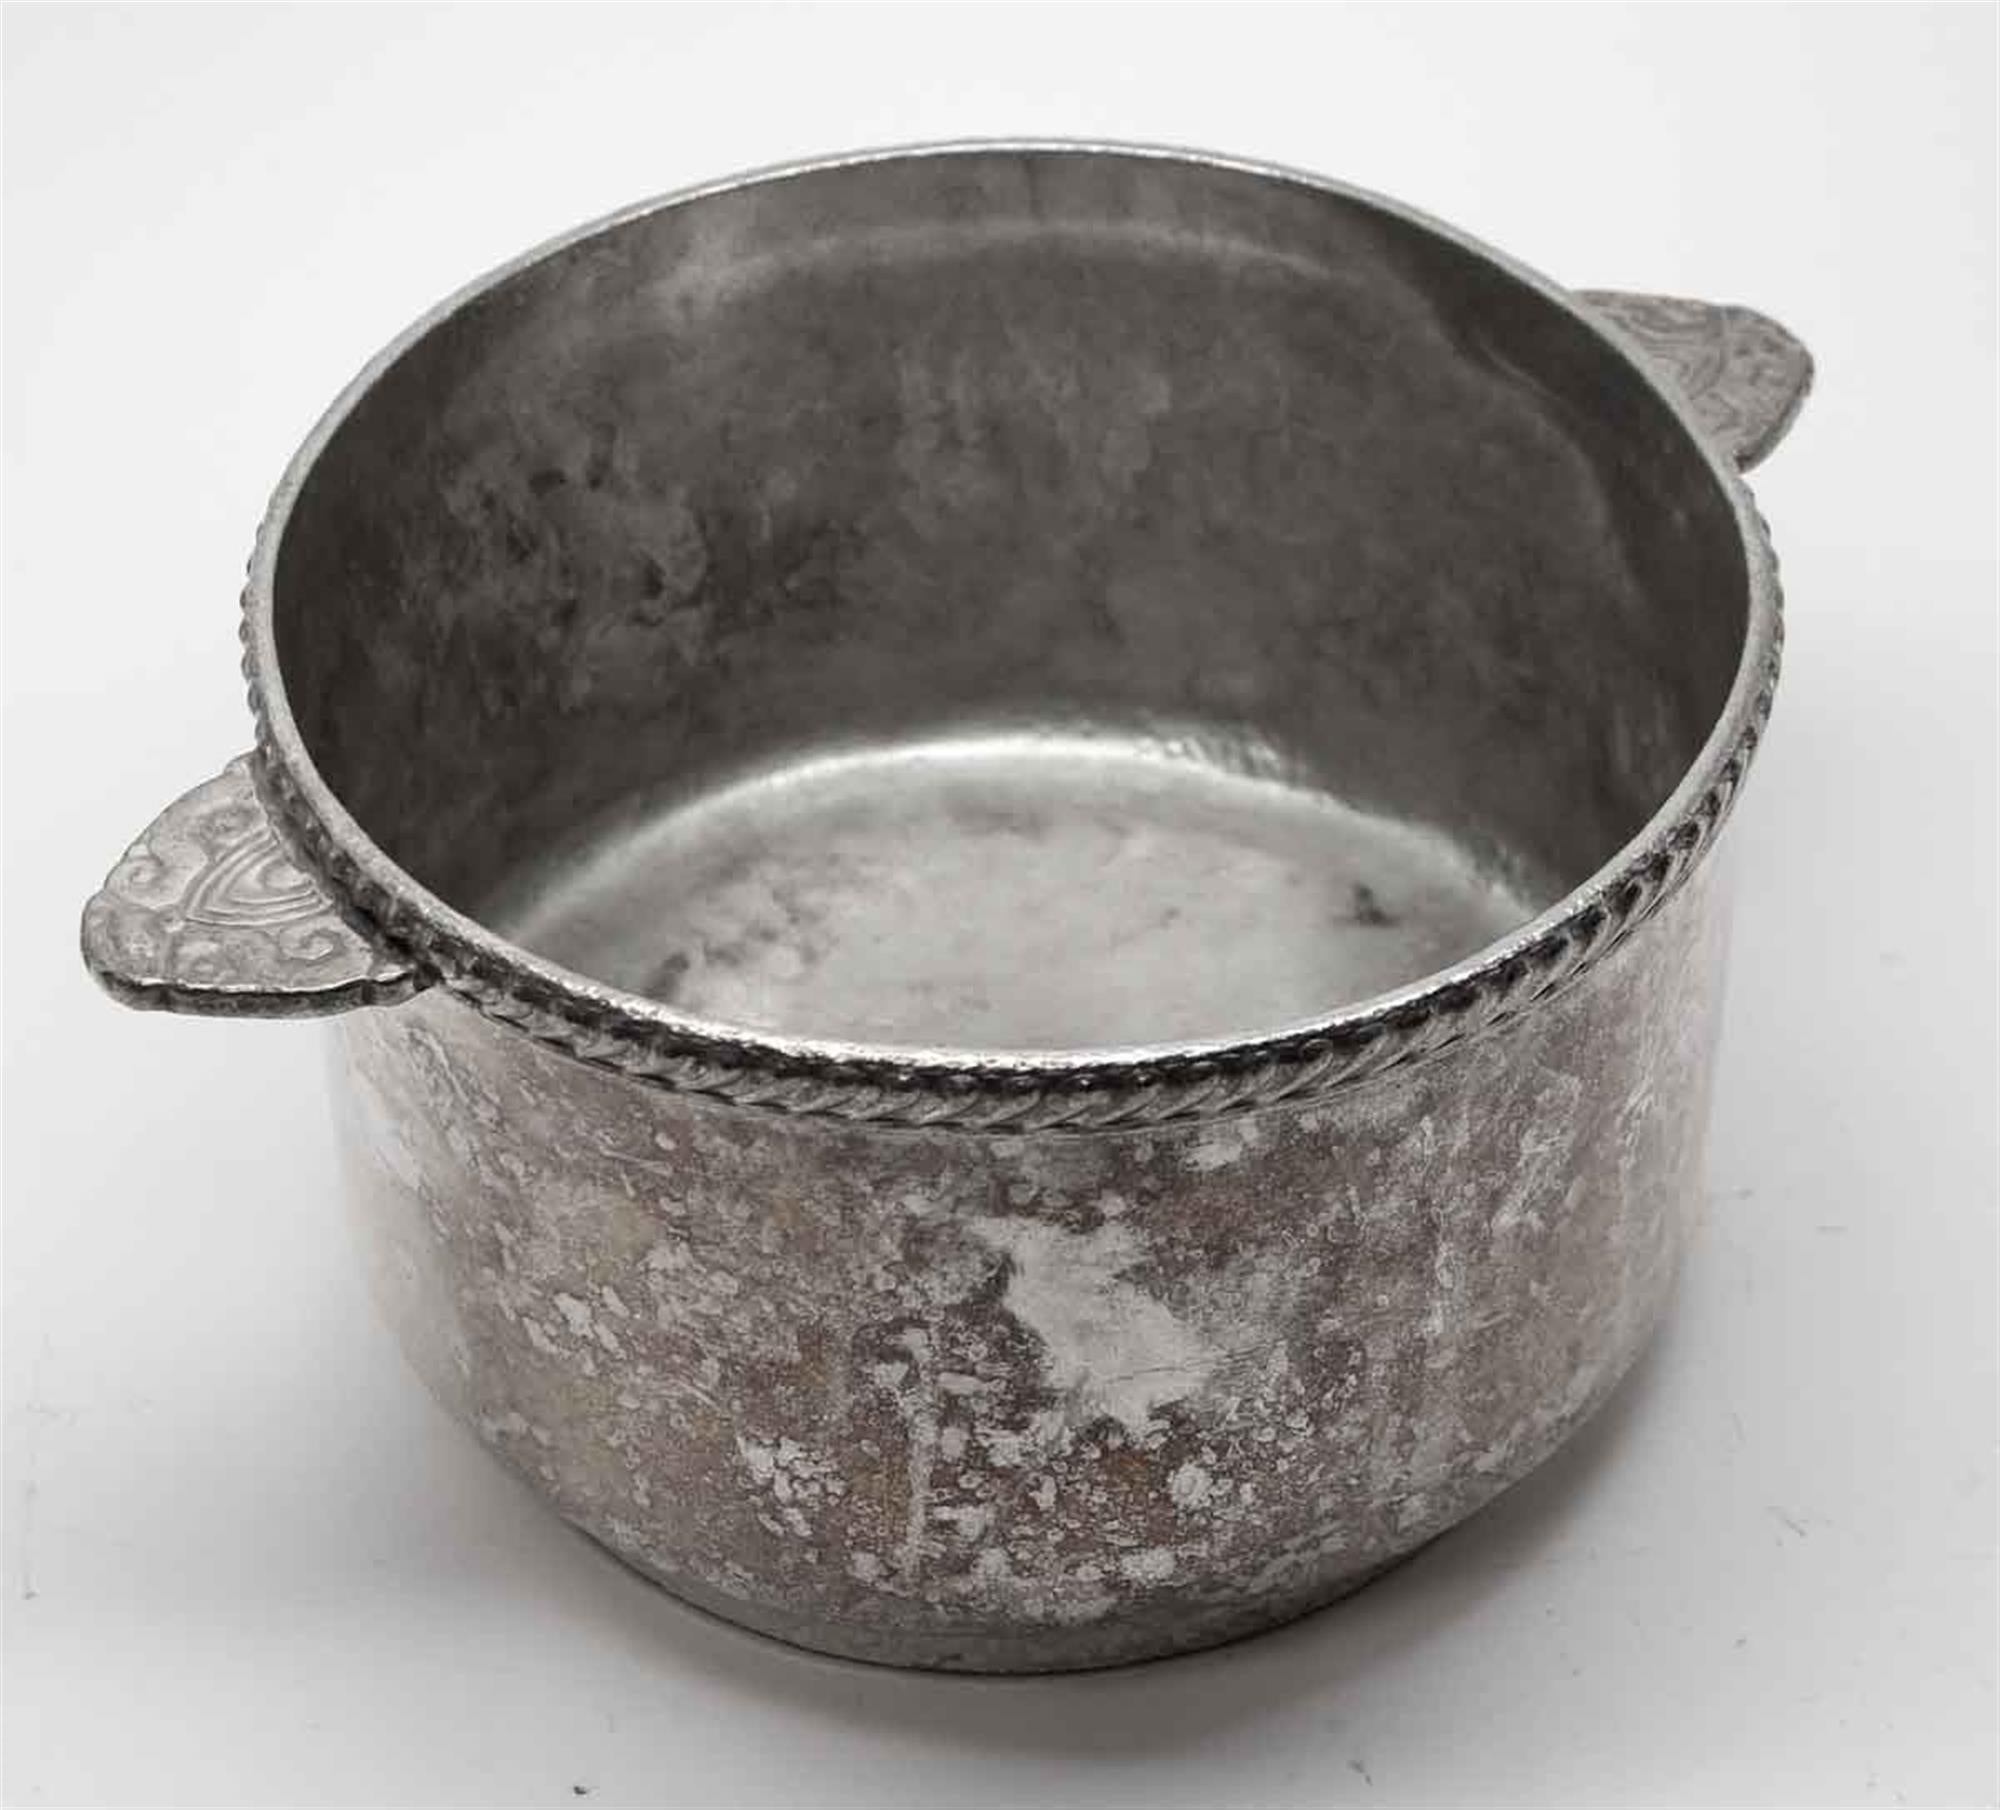 Silver plate over brass Art Deco style bowl with a decorative rim and handles from the 1931 NYC Waldorf Astoria Hotel. Made by D.W Haber & Son. Some are stamped Waldorf Astoria on the bottom. This item is original to the Waldorf Astoria Towers. Bowl